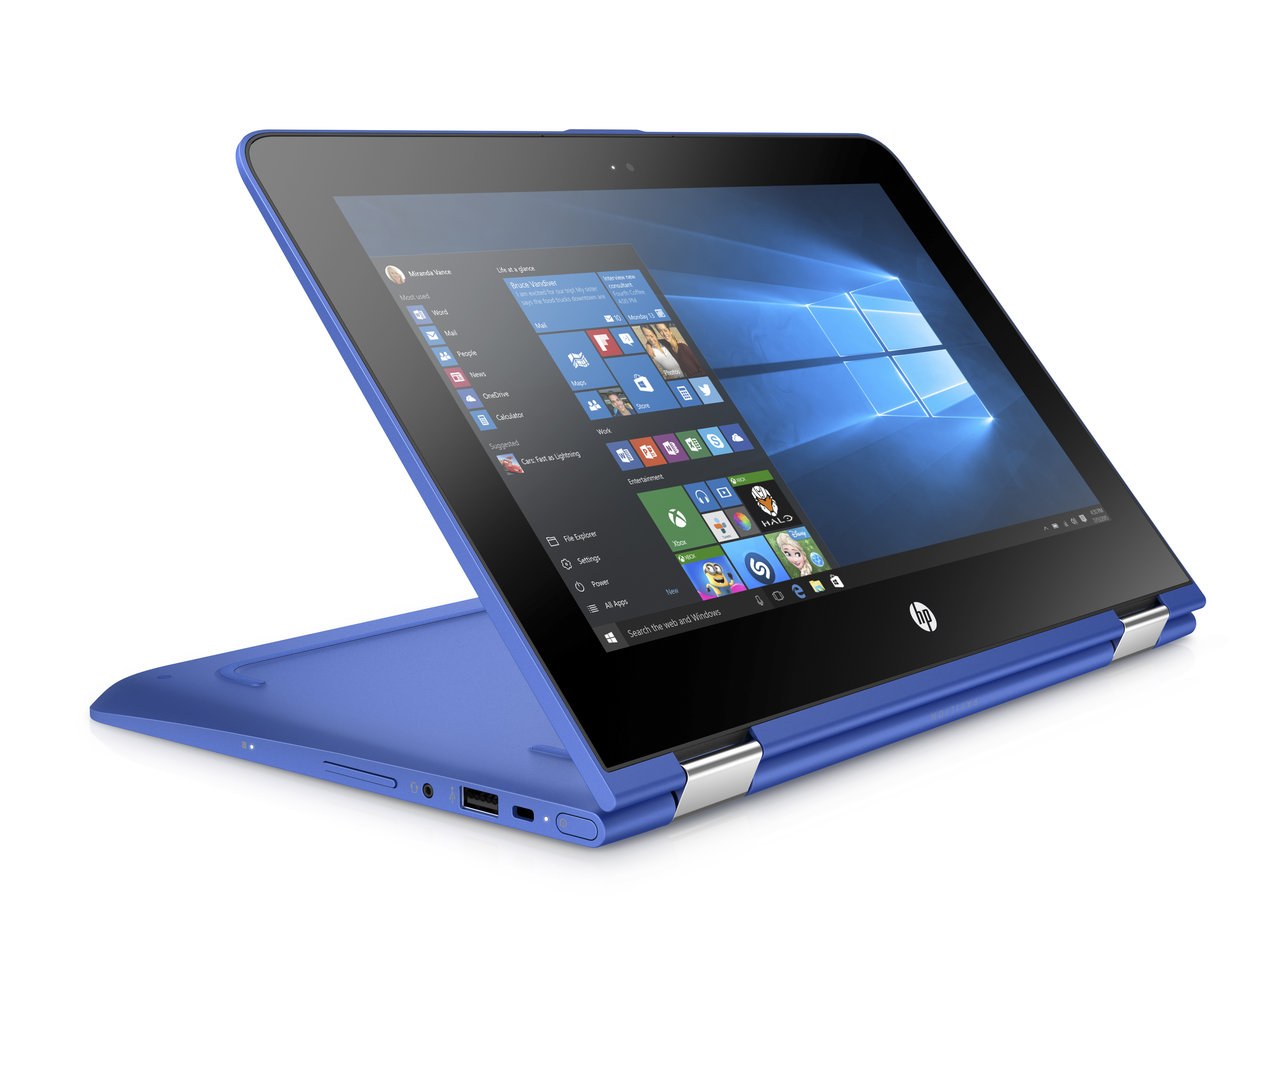 HP Pavilion x360 11 in Dragonfly Blue